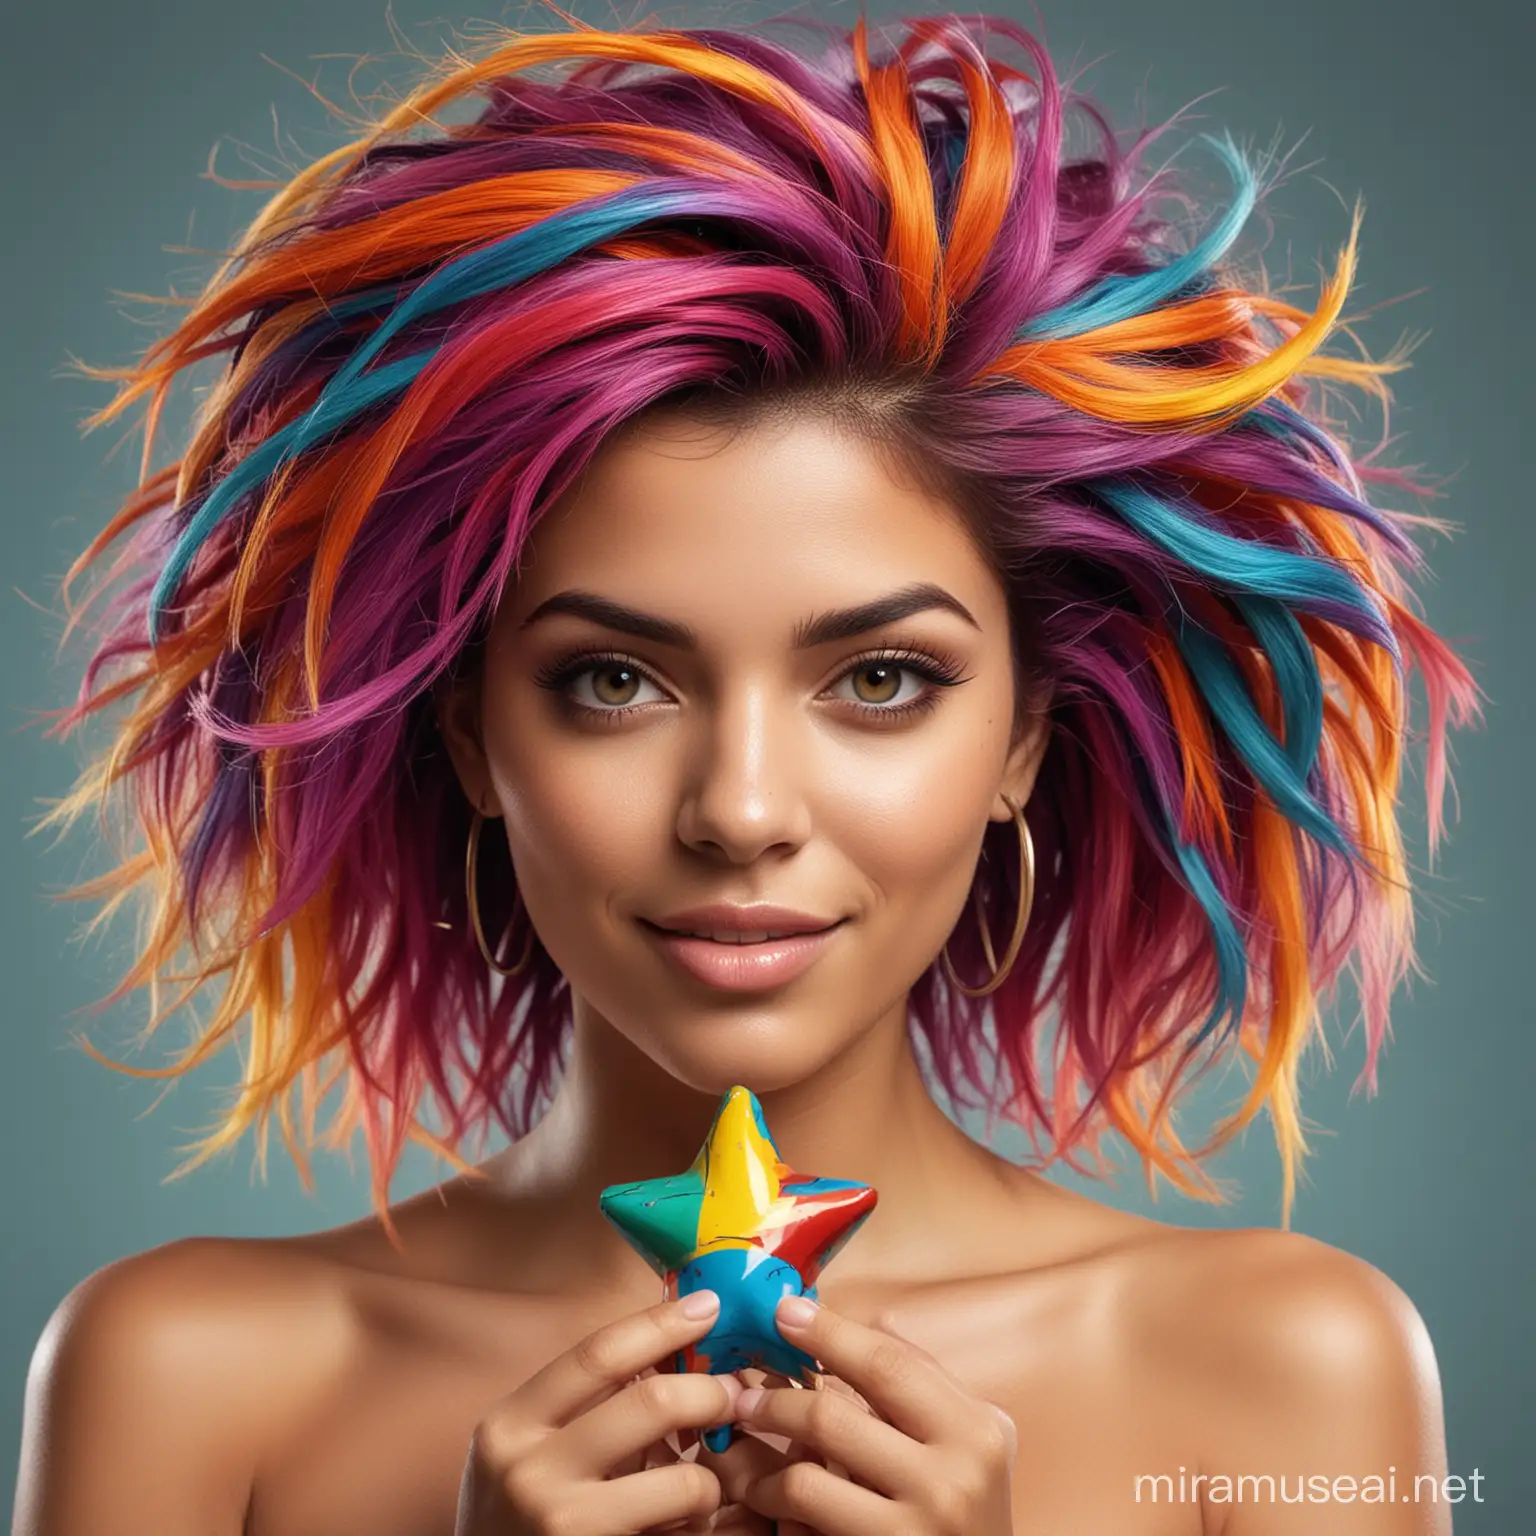 a vibrant and confident brazilian woman with bold, colorful hair and expressive eyes, holding a whimsical and unique toy. Surround her with elements that evoke energy and empowerment, such as lightning bolts or stars. Additionally, incorporate subtle hints of loop or repetition, perhaps through mirrored reflections or circular patterns